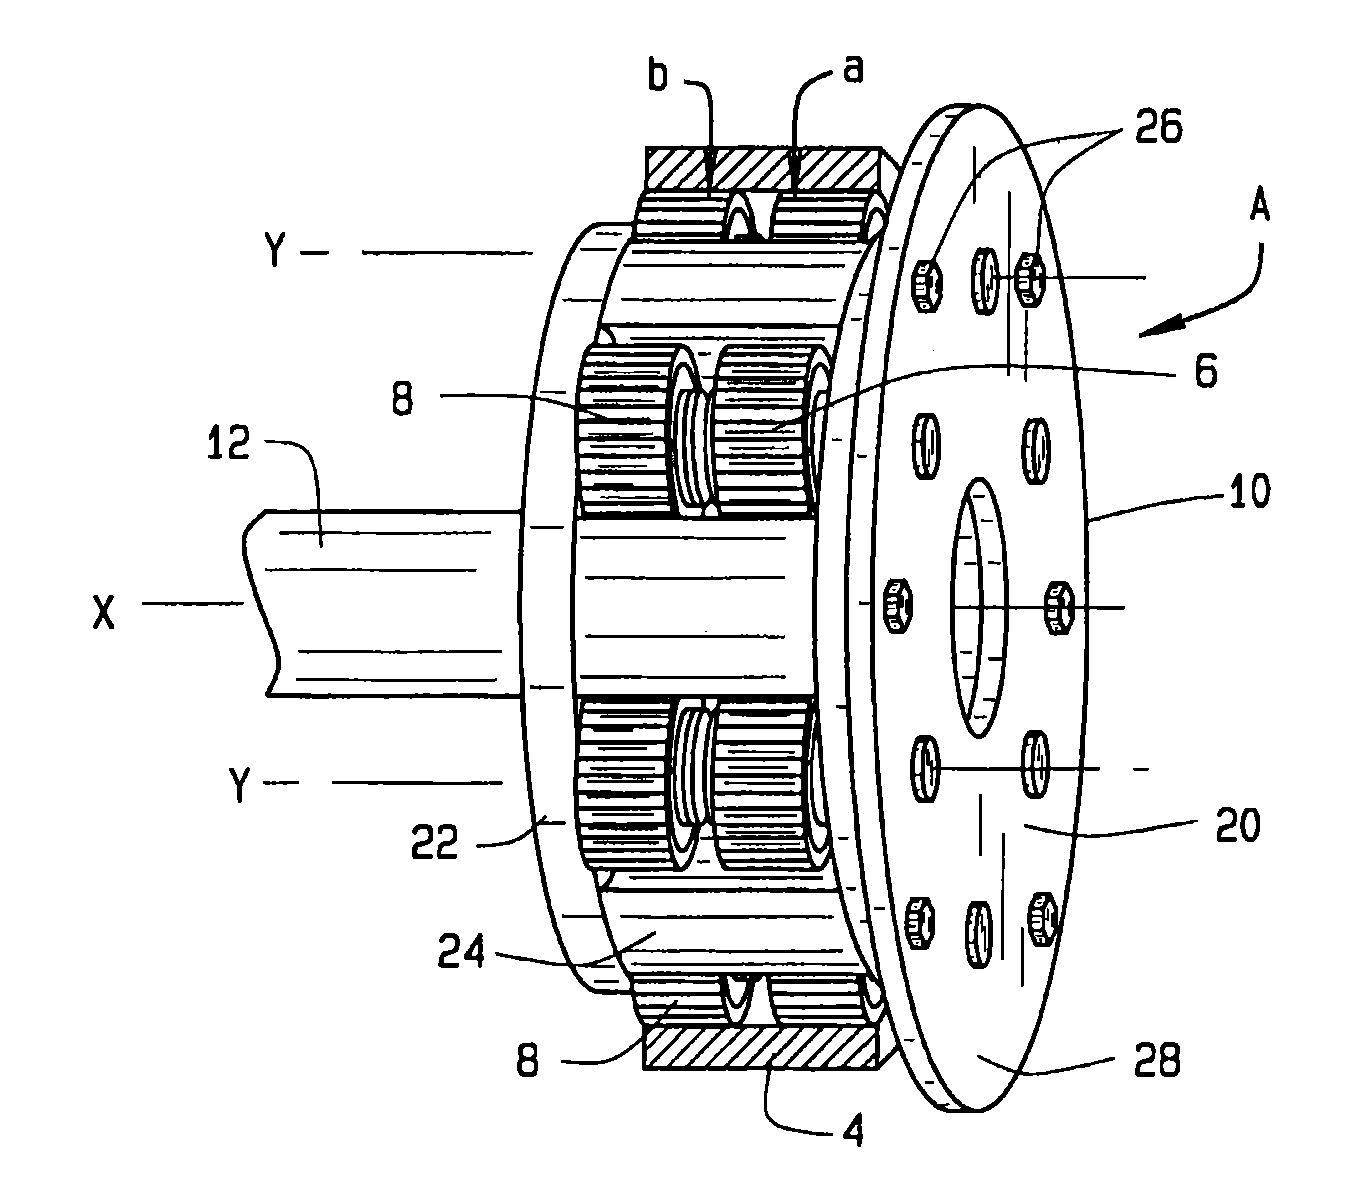 Epicyclic gear system having two arrays of pinions mounted on flexpins with compensation for carrier distortion